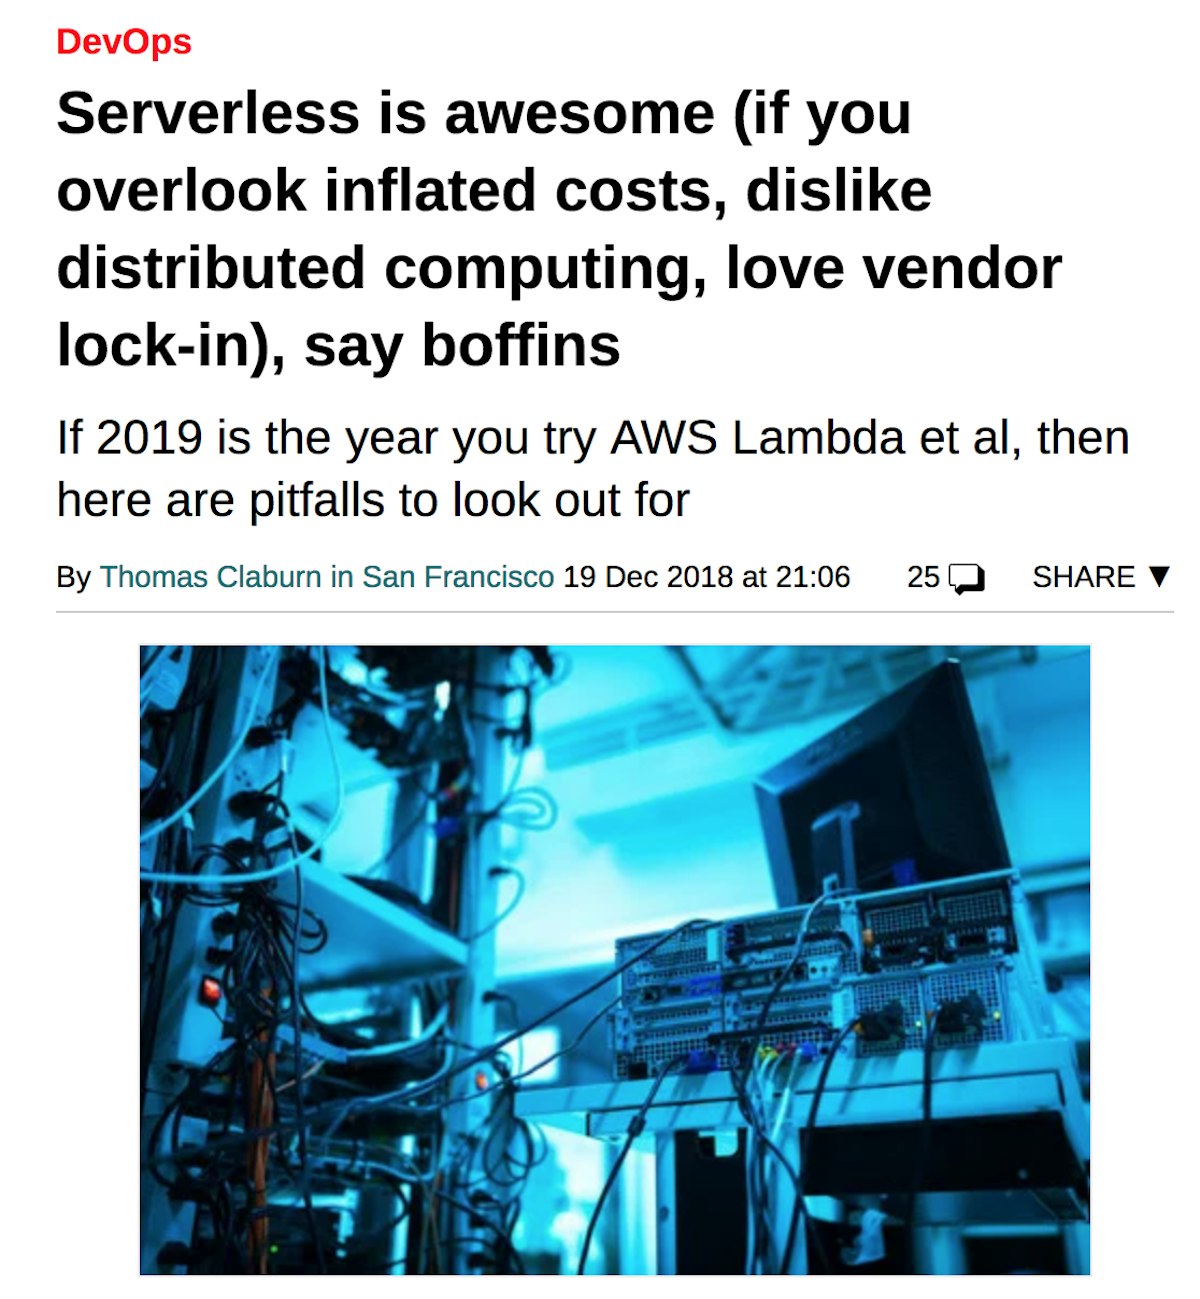 featured image - You are thinking about serverless costs all wrong